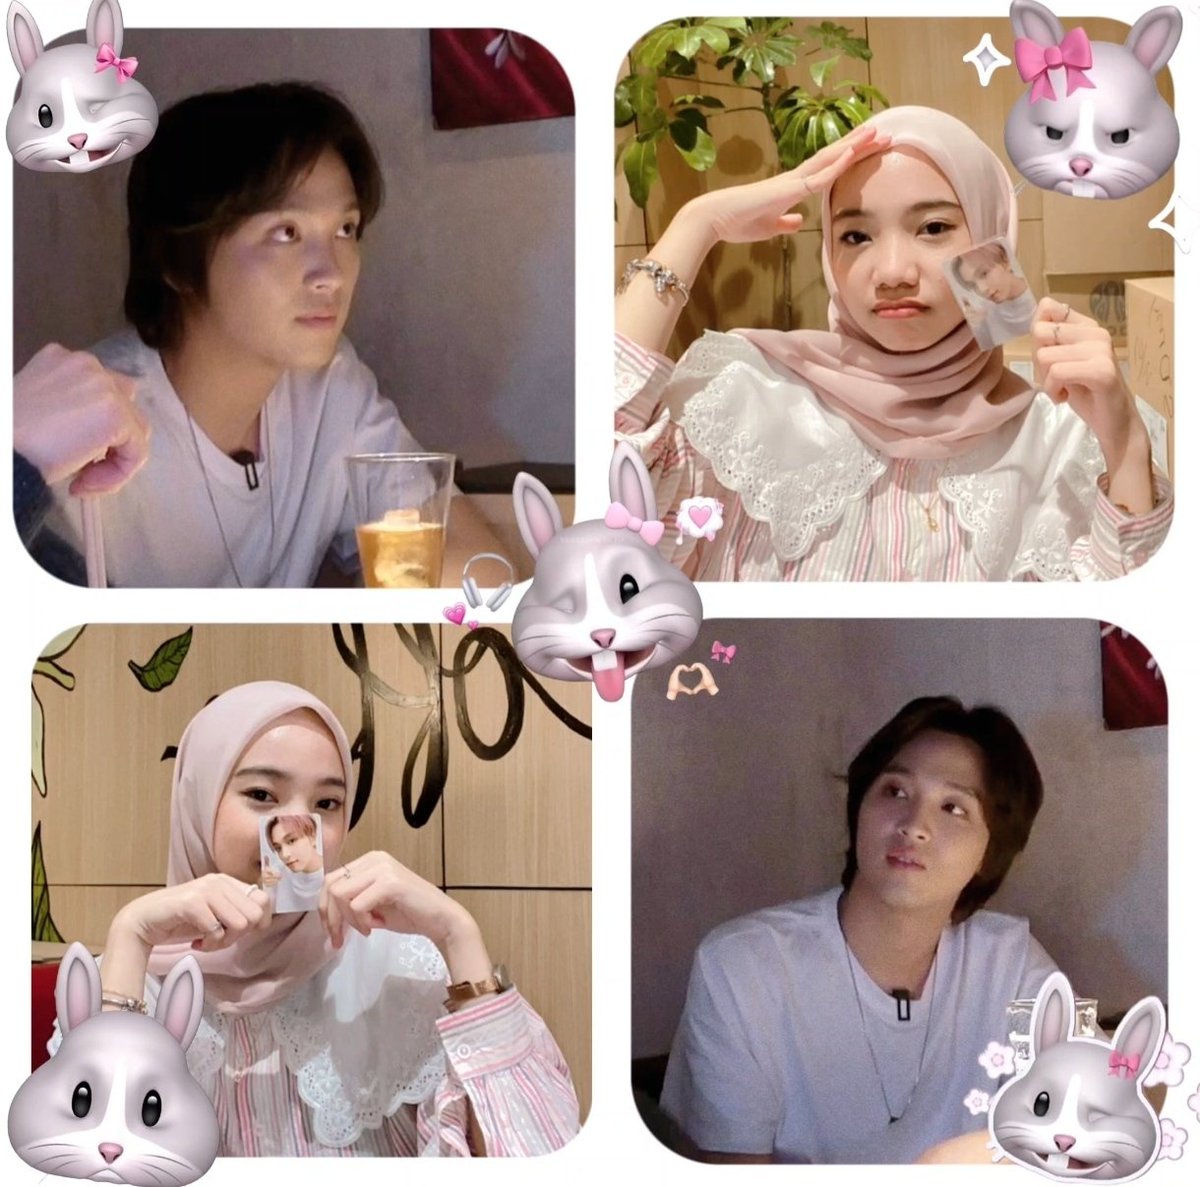 ᯓᡣ𐭩 my cute side coming out when i'm with him(๑>ᴗ<๑)💗🐰🎀

#NctzenSelcaDay #NSD #NCTzen #HAECHAN #NCTDREAM #NCT127 @NCTsmtown